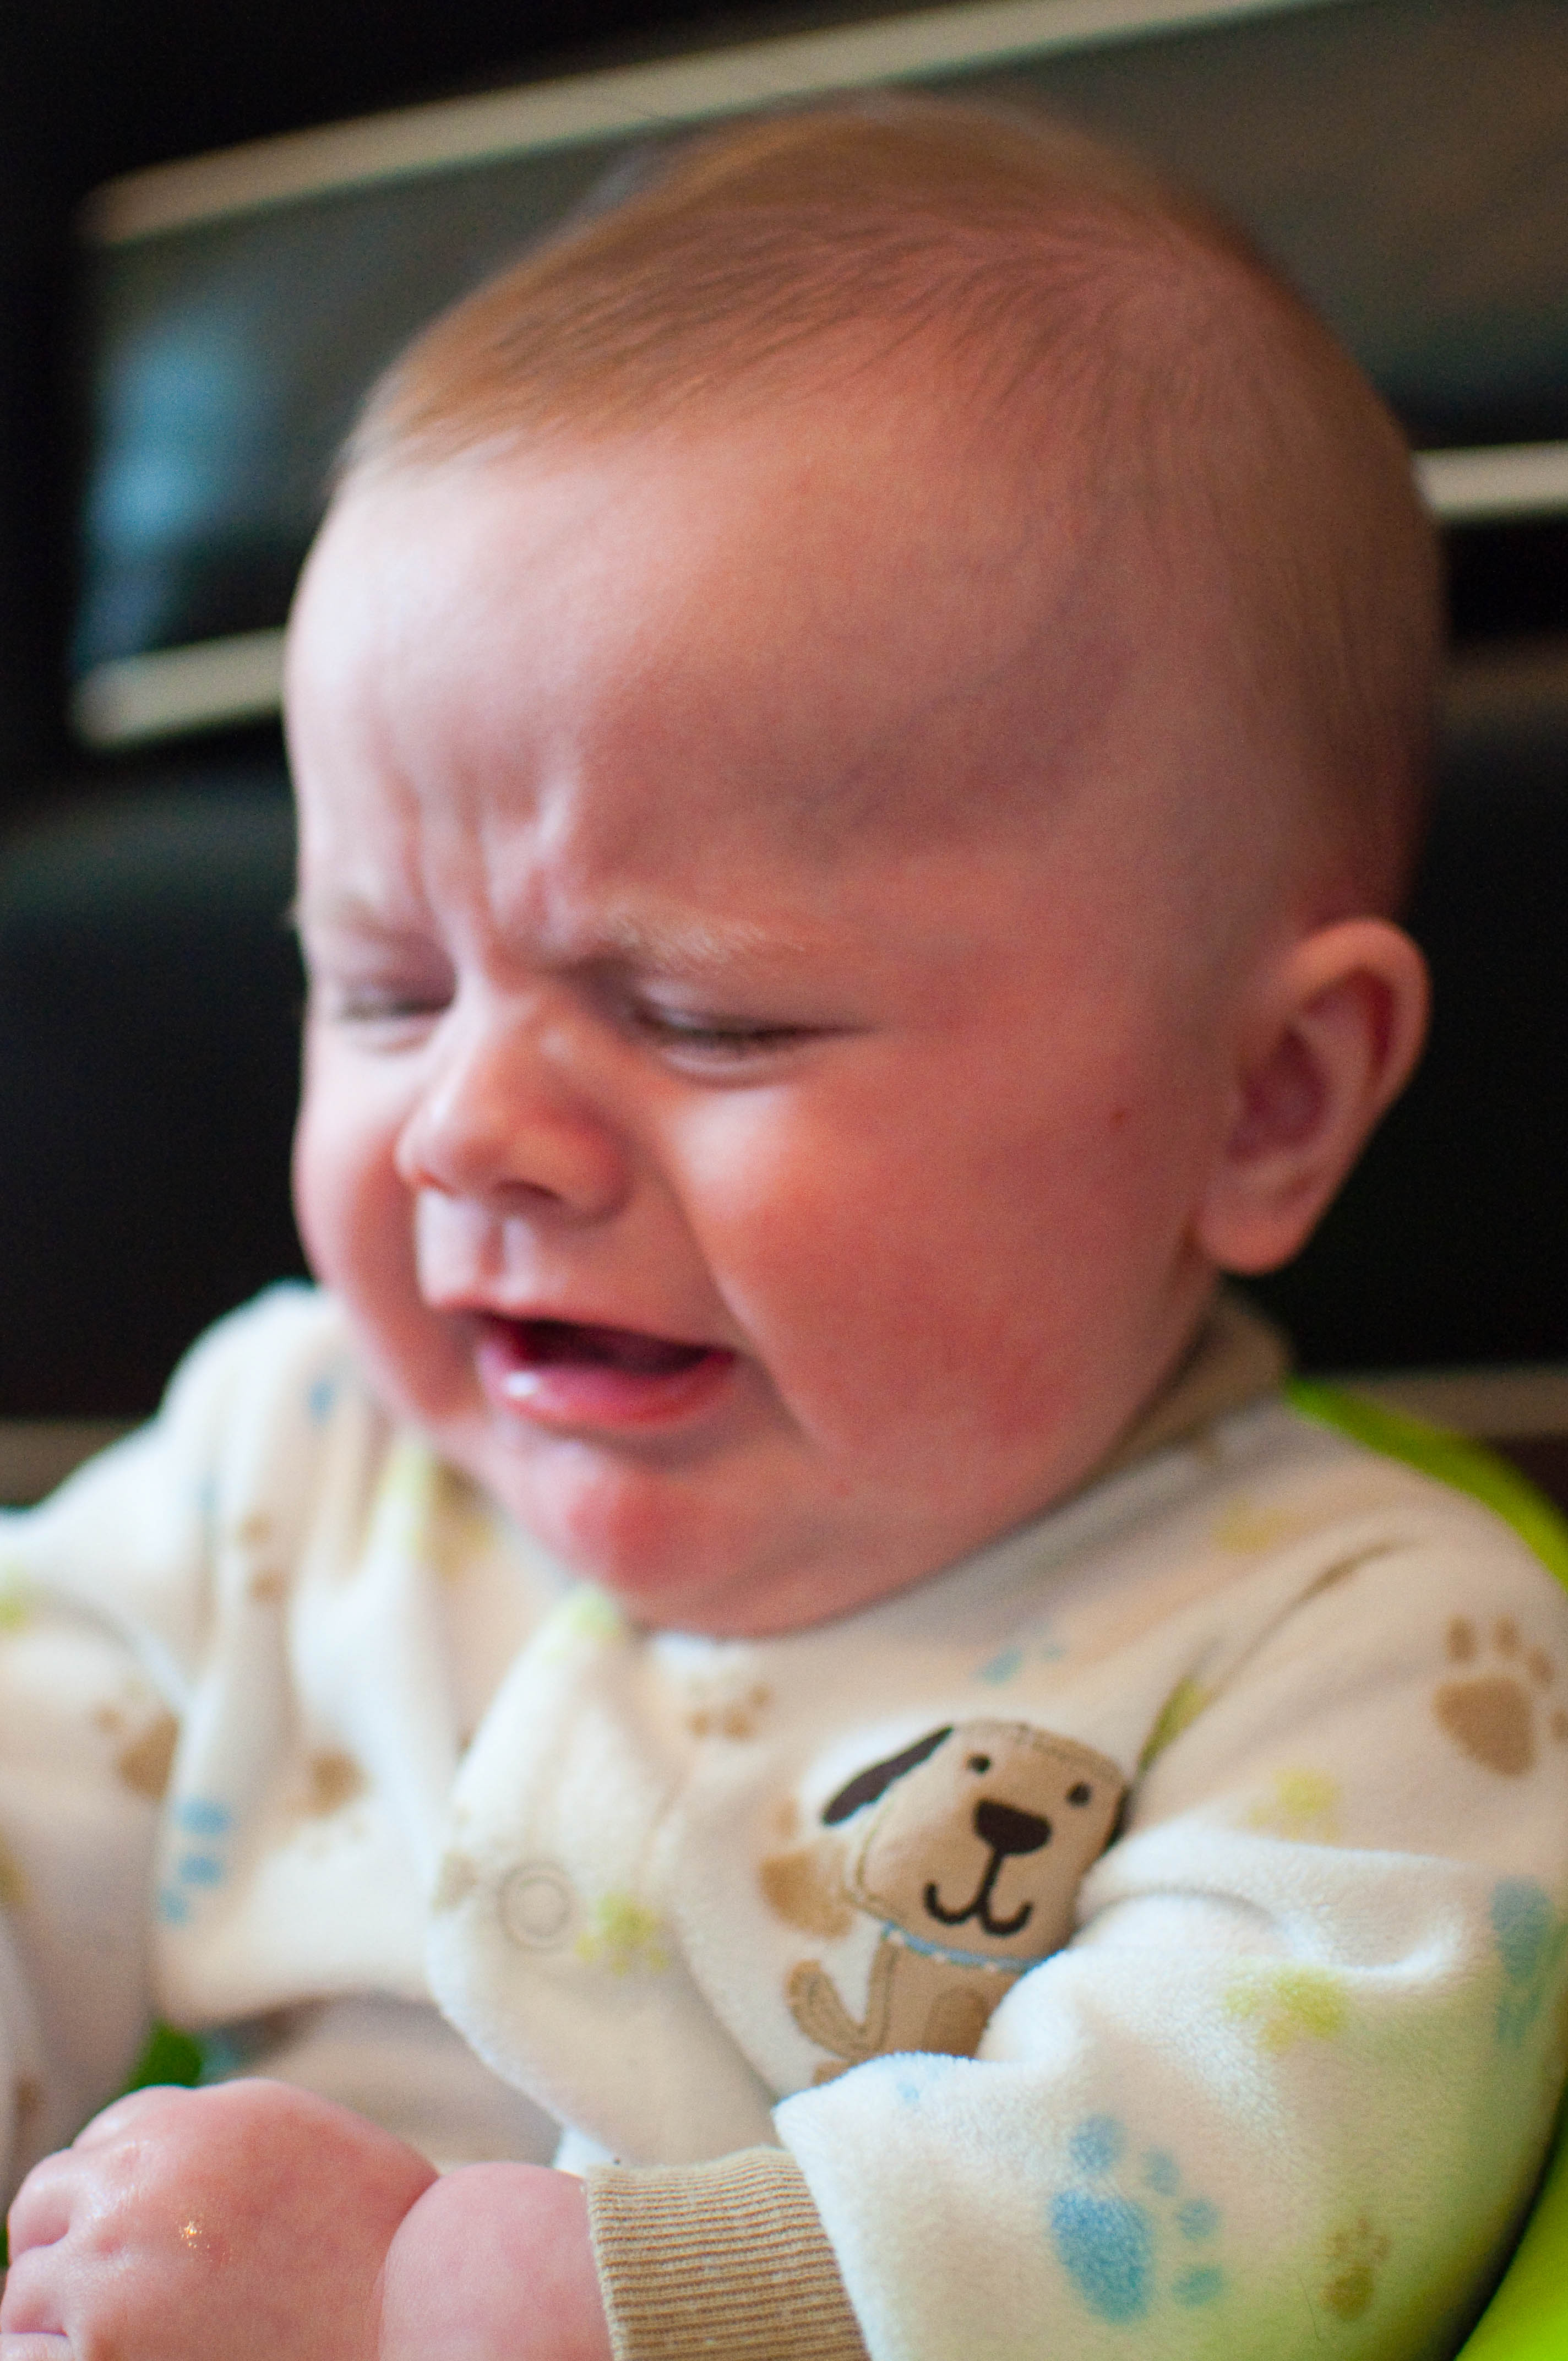 An infant making a sad facial expression.^[[Image](https://www.flickr.com/photos/acheron0/5340364246) by [acheron0](https://www.flickr.com/photos/acheron0/) is licensed under [CC BY 2.0](https://creativecommons.org/licenses/by/2.0/)]